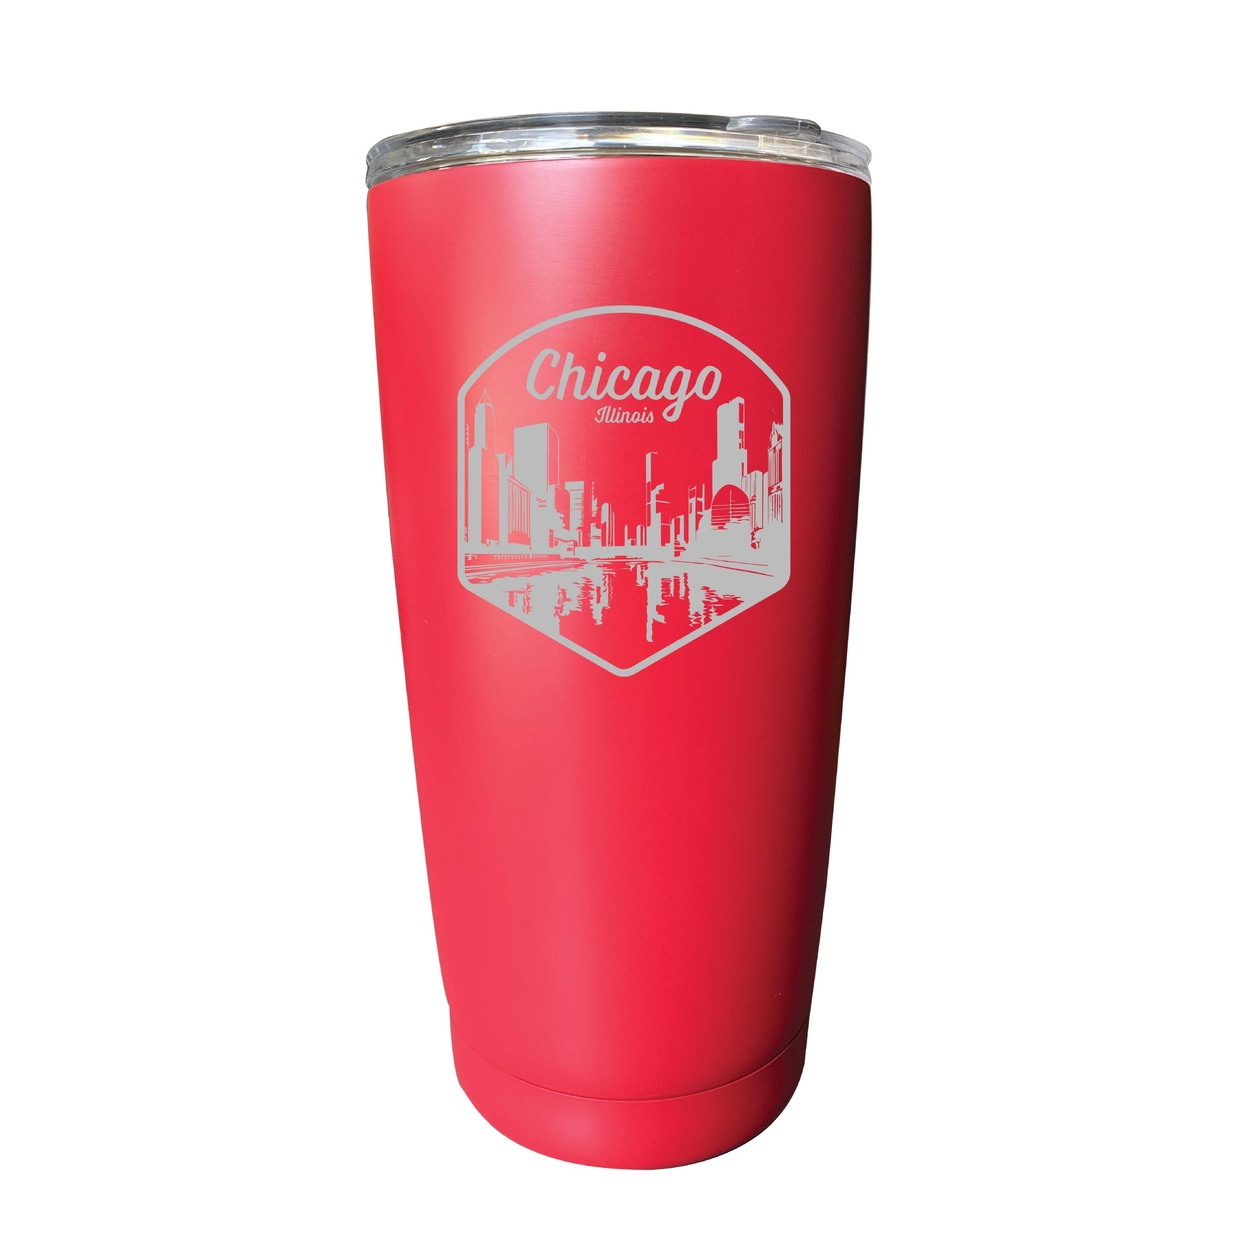 Chicago Illinois Souvenir 16 Oz Engraved Insulated Tumbler - Red,,4-Pack